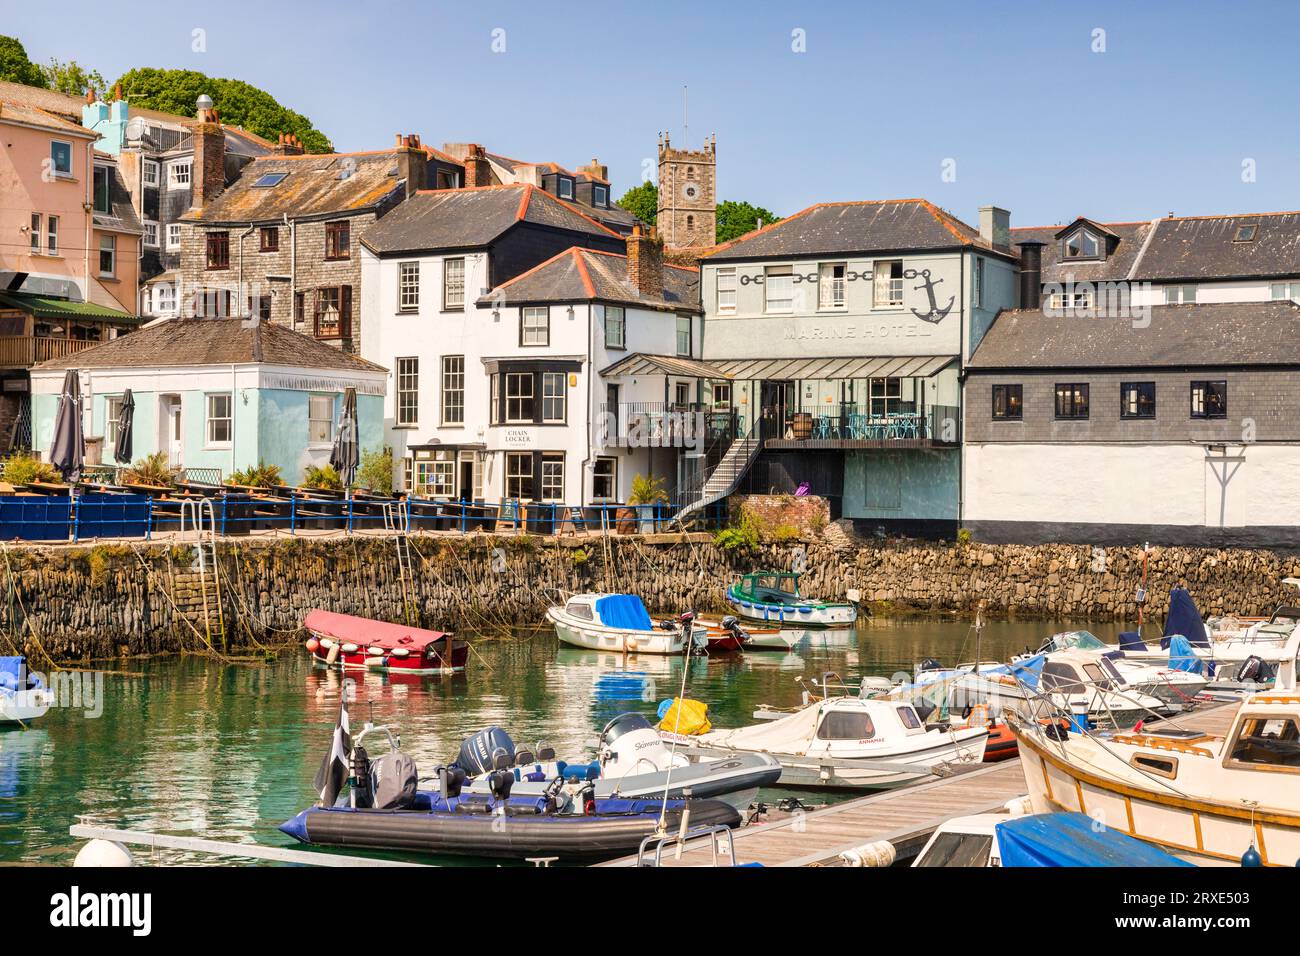 24 May 2022: Falmouth, Cornwall, UK - Historic buildings at Falmouth Quay, and boats in the harbour. Sunny spring day, no people. The Chain Locker is... Stock Photo